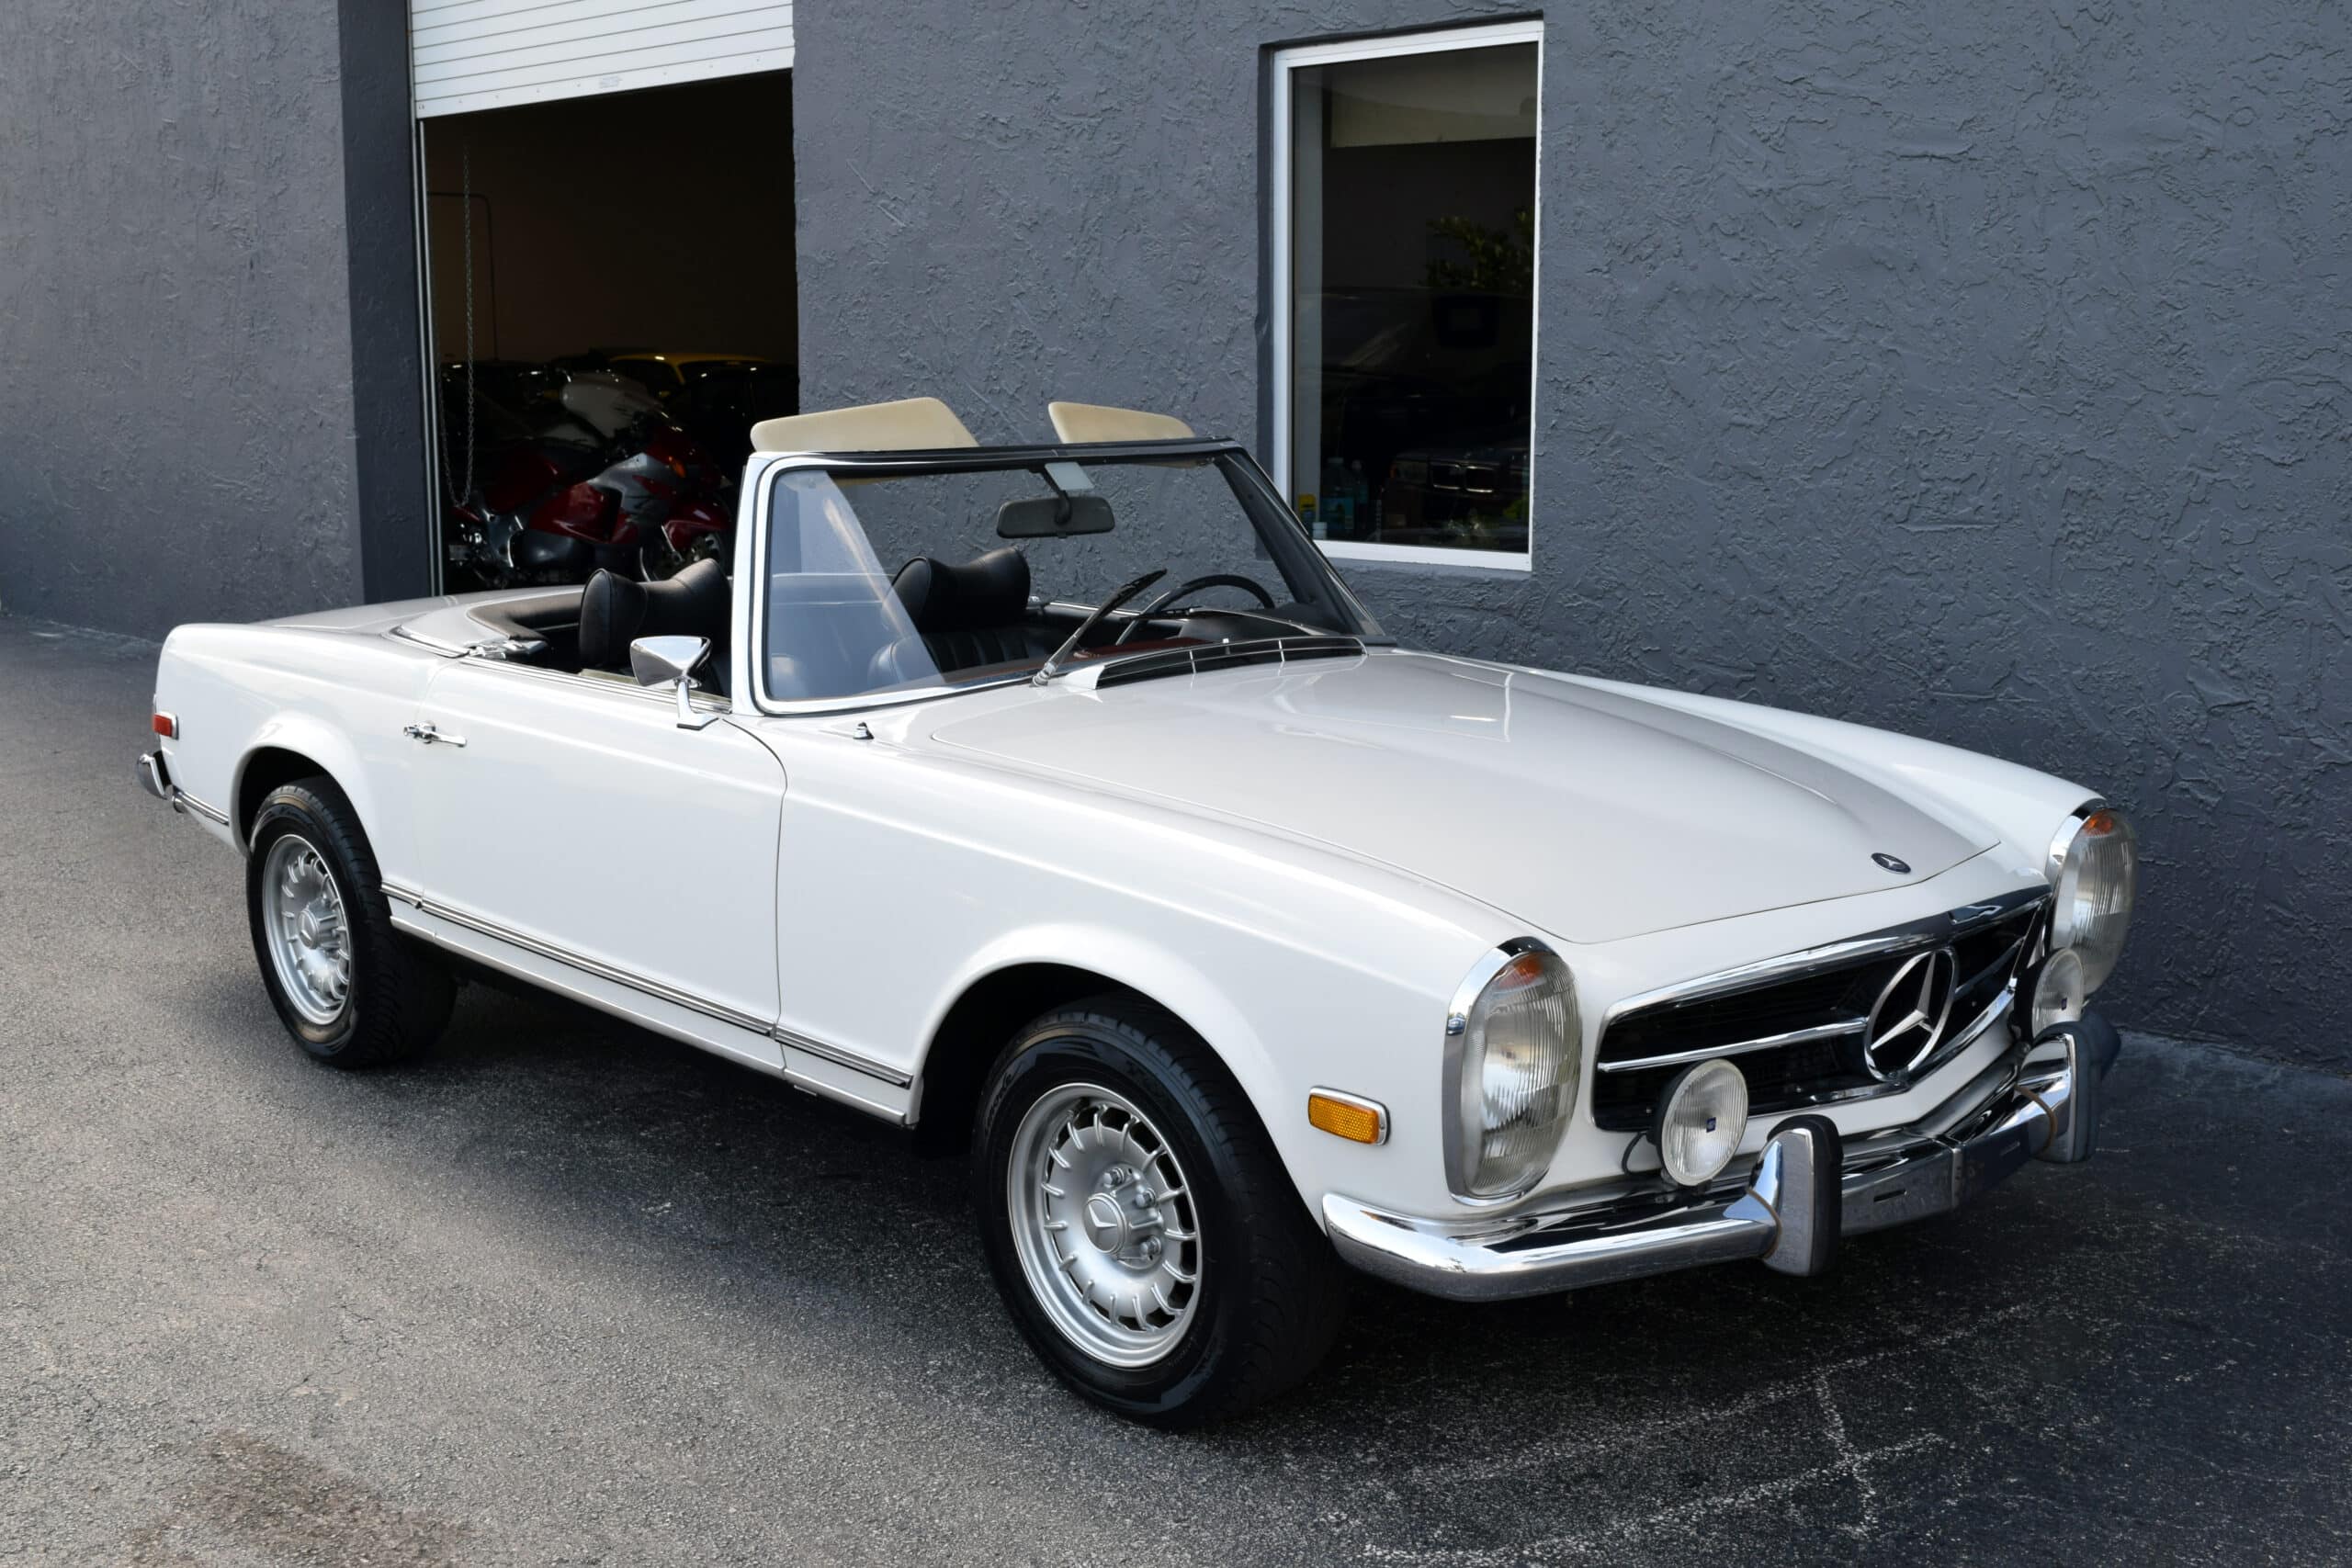 1968 Mercedes 250 SL “Pagoda”, 4-Speed manual, AC and Power Steering, unrestored in amazing time capsule condition